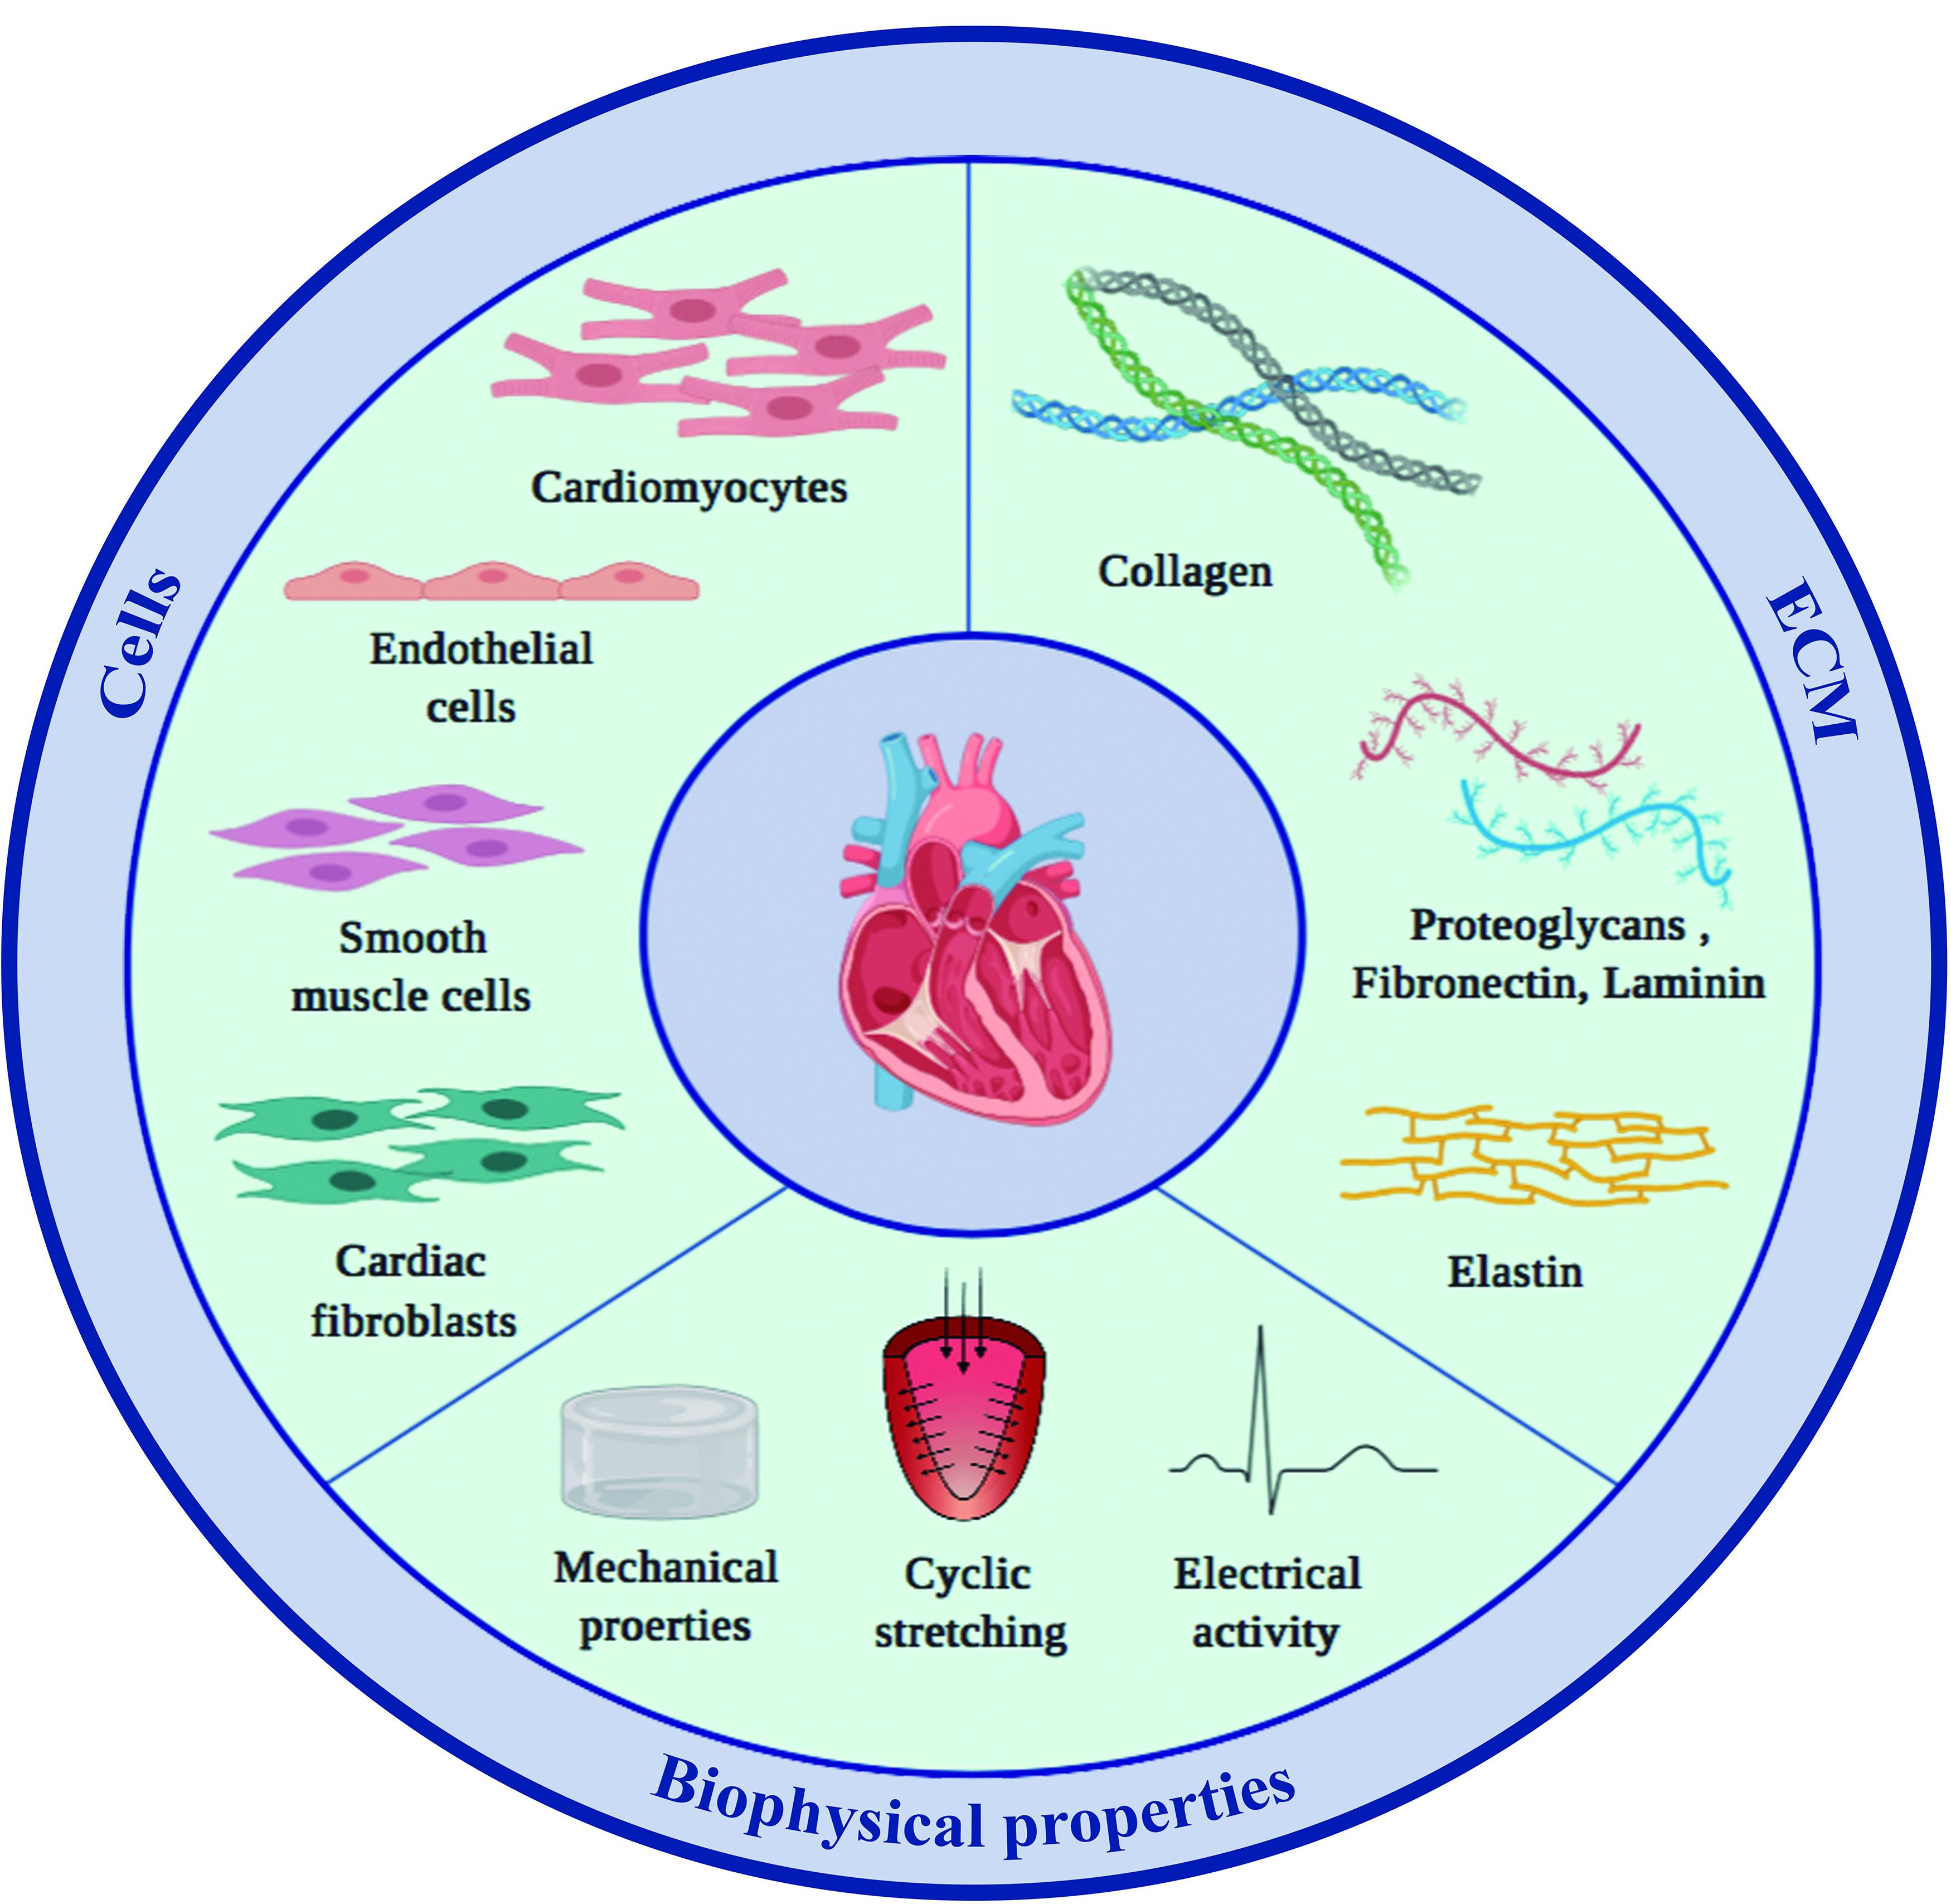 Frontiers Cells Materials And Fabrication Processes For Cardiac Tissue Engineering Bioengineering And Biotechnology